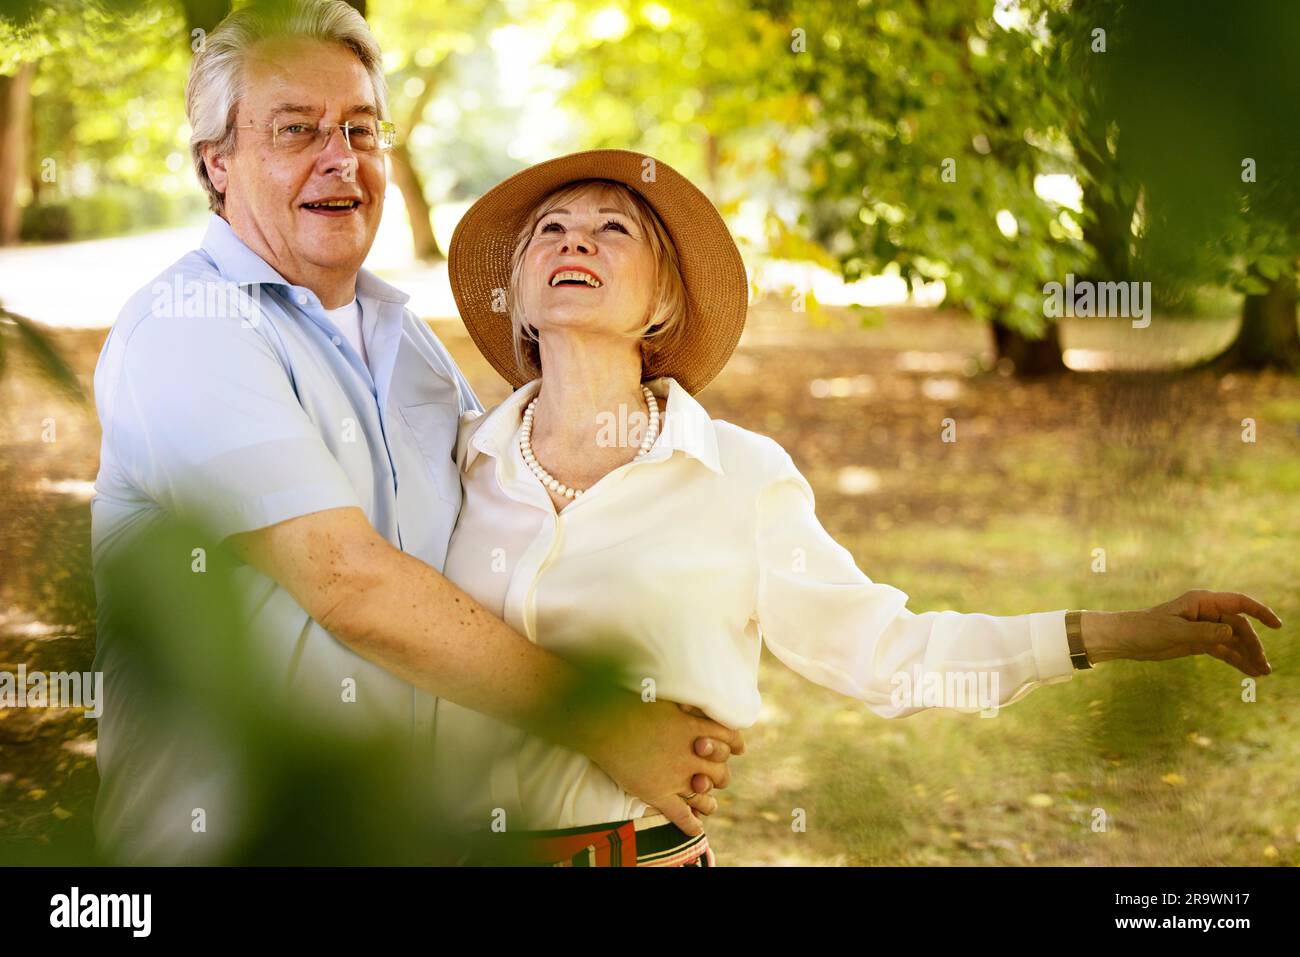 Germany, elderly woman with summer straw hat standing in a park together with her husband, portrait Stock Photo